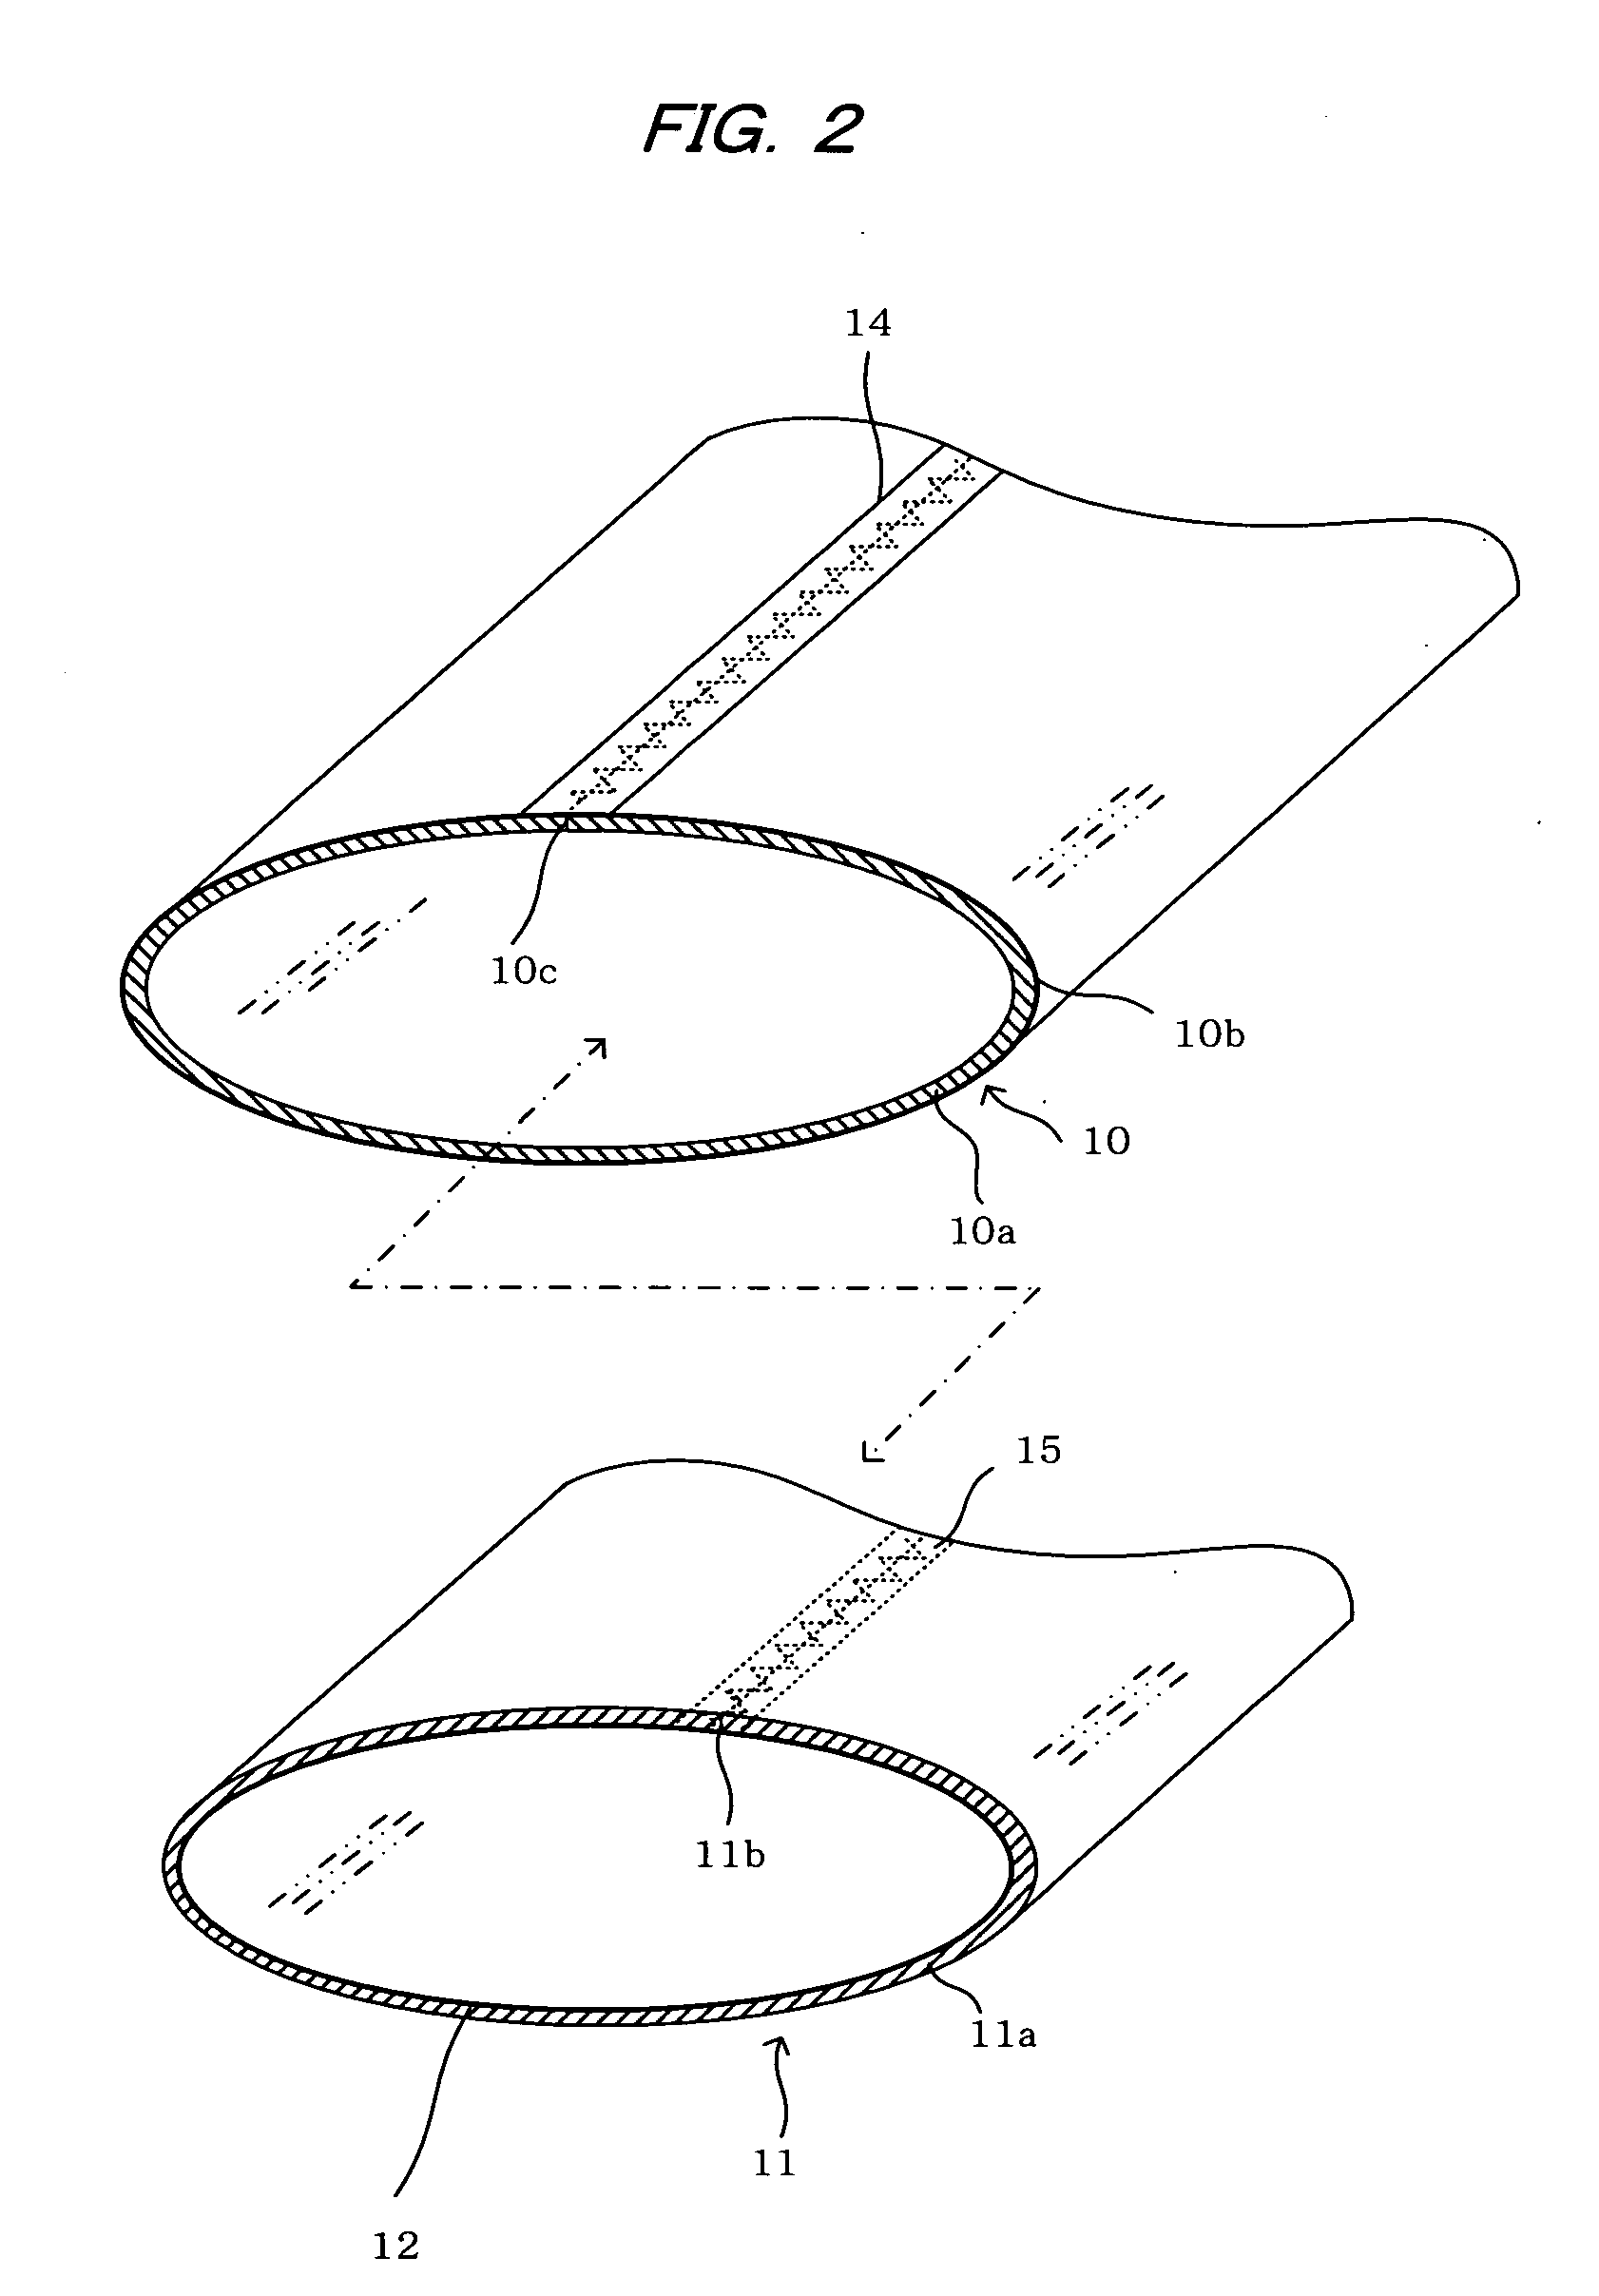 Pipe lining material and method for manufacturing same